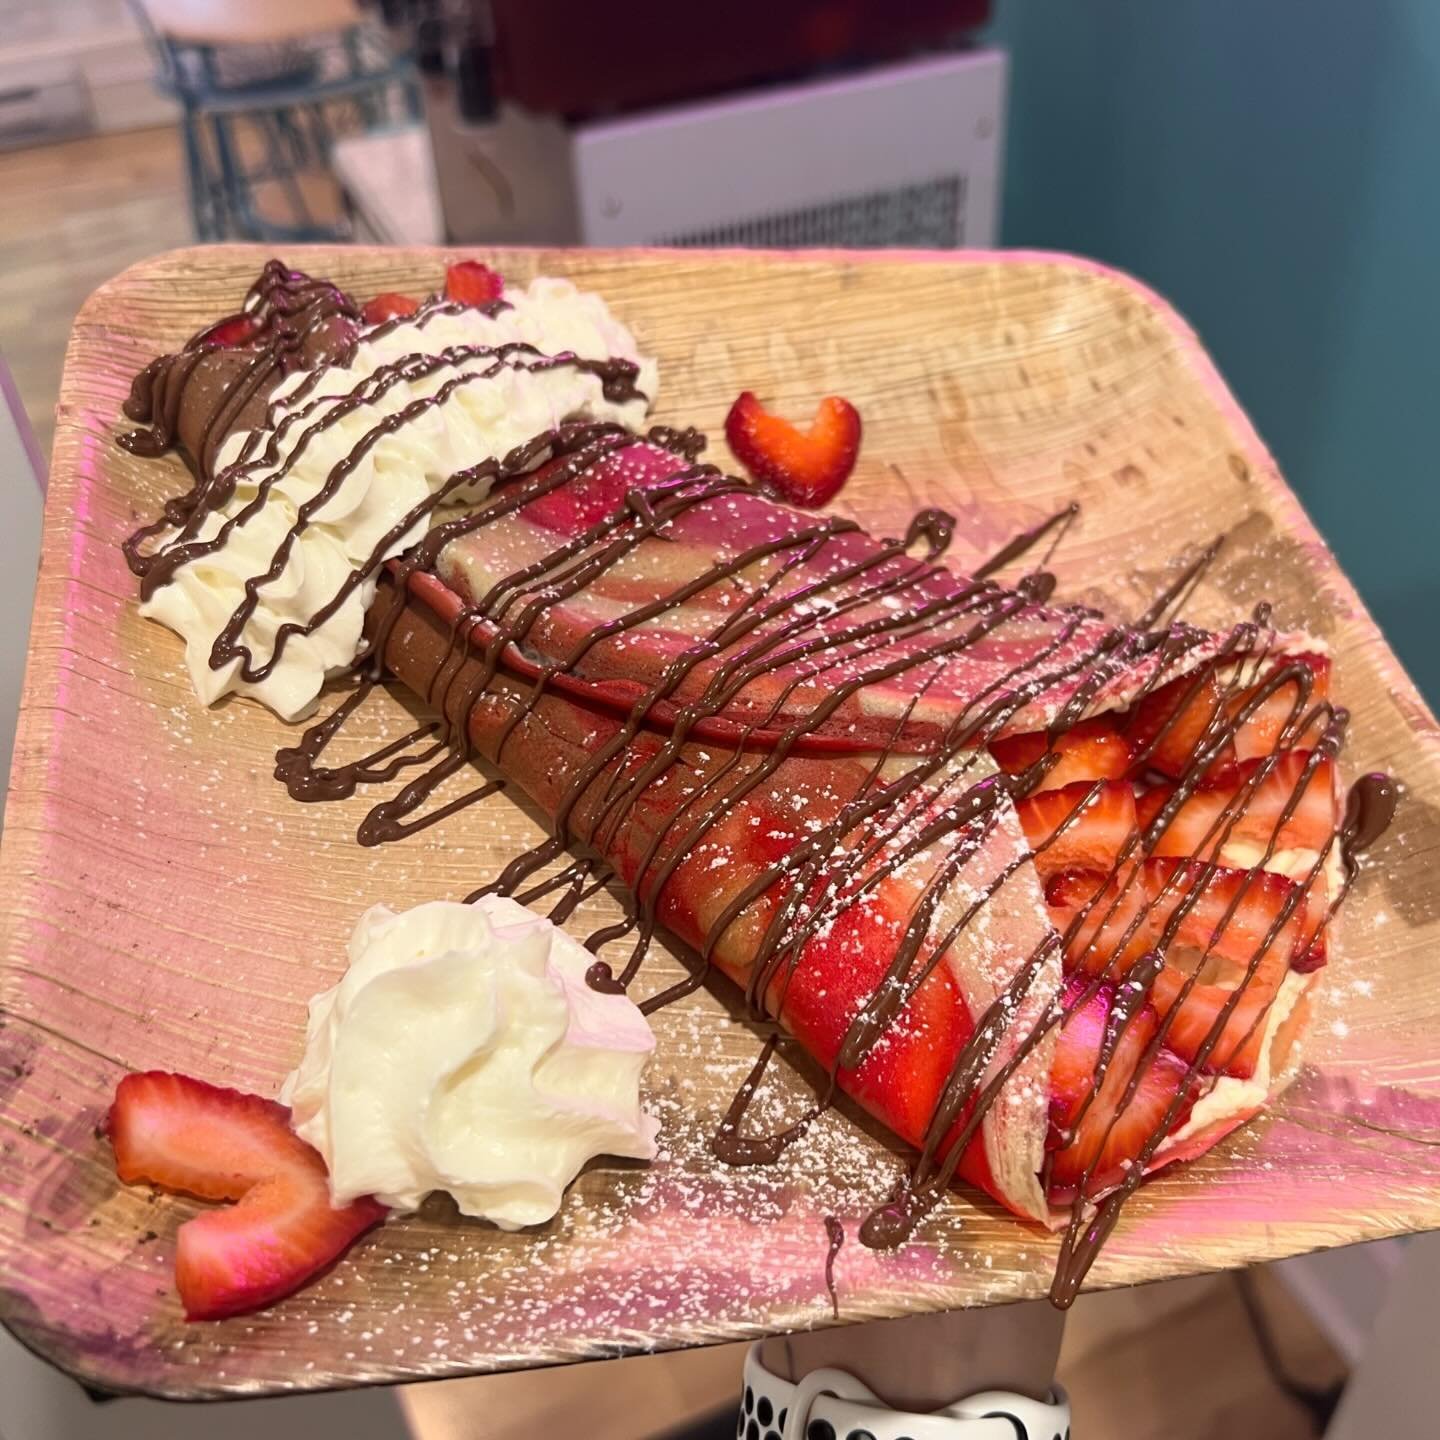 Mothers Day Crepe 🍫🧁💗
&lsquo; I Love My Mom &lsquo;
- Marble crepe stuffed with organic homemade cream cheese whip, strawberries, hugged by whipped cream, powered sugar and nutella drizzle